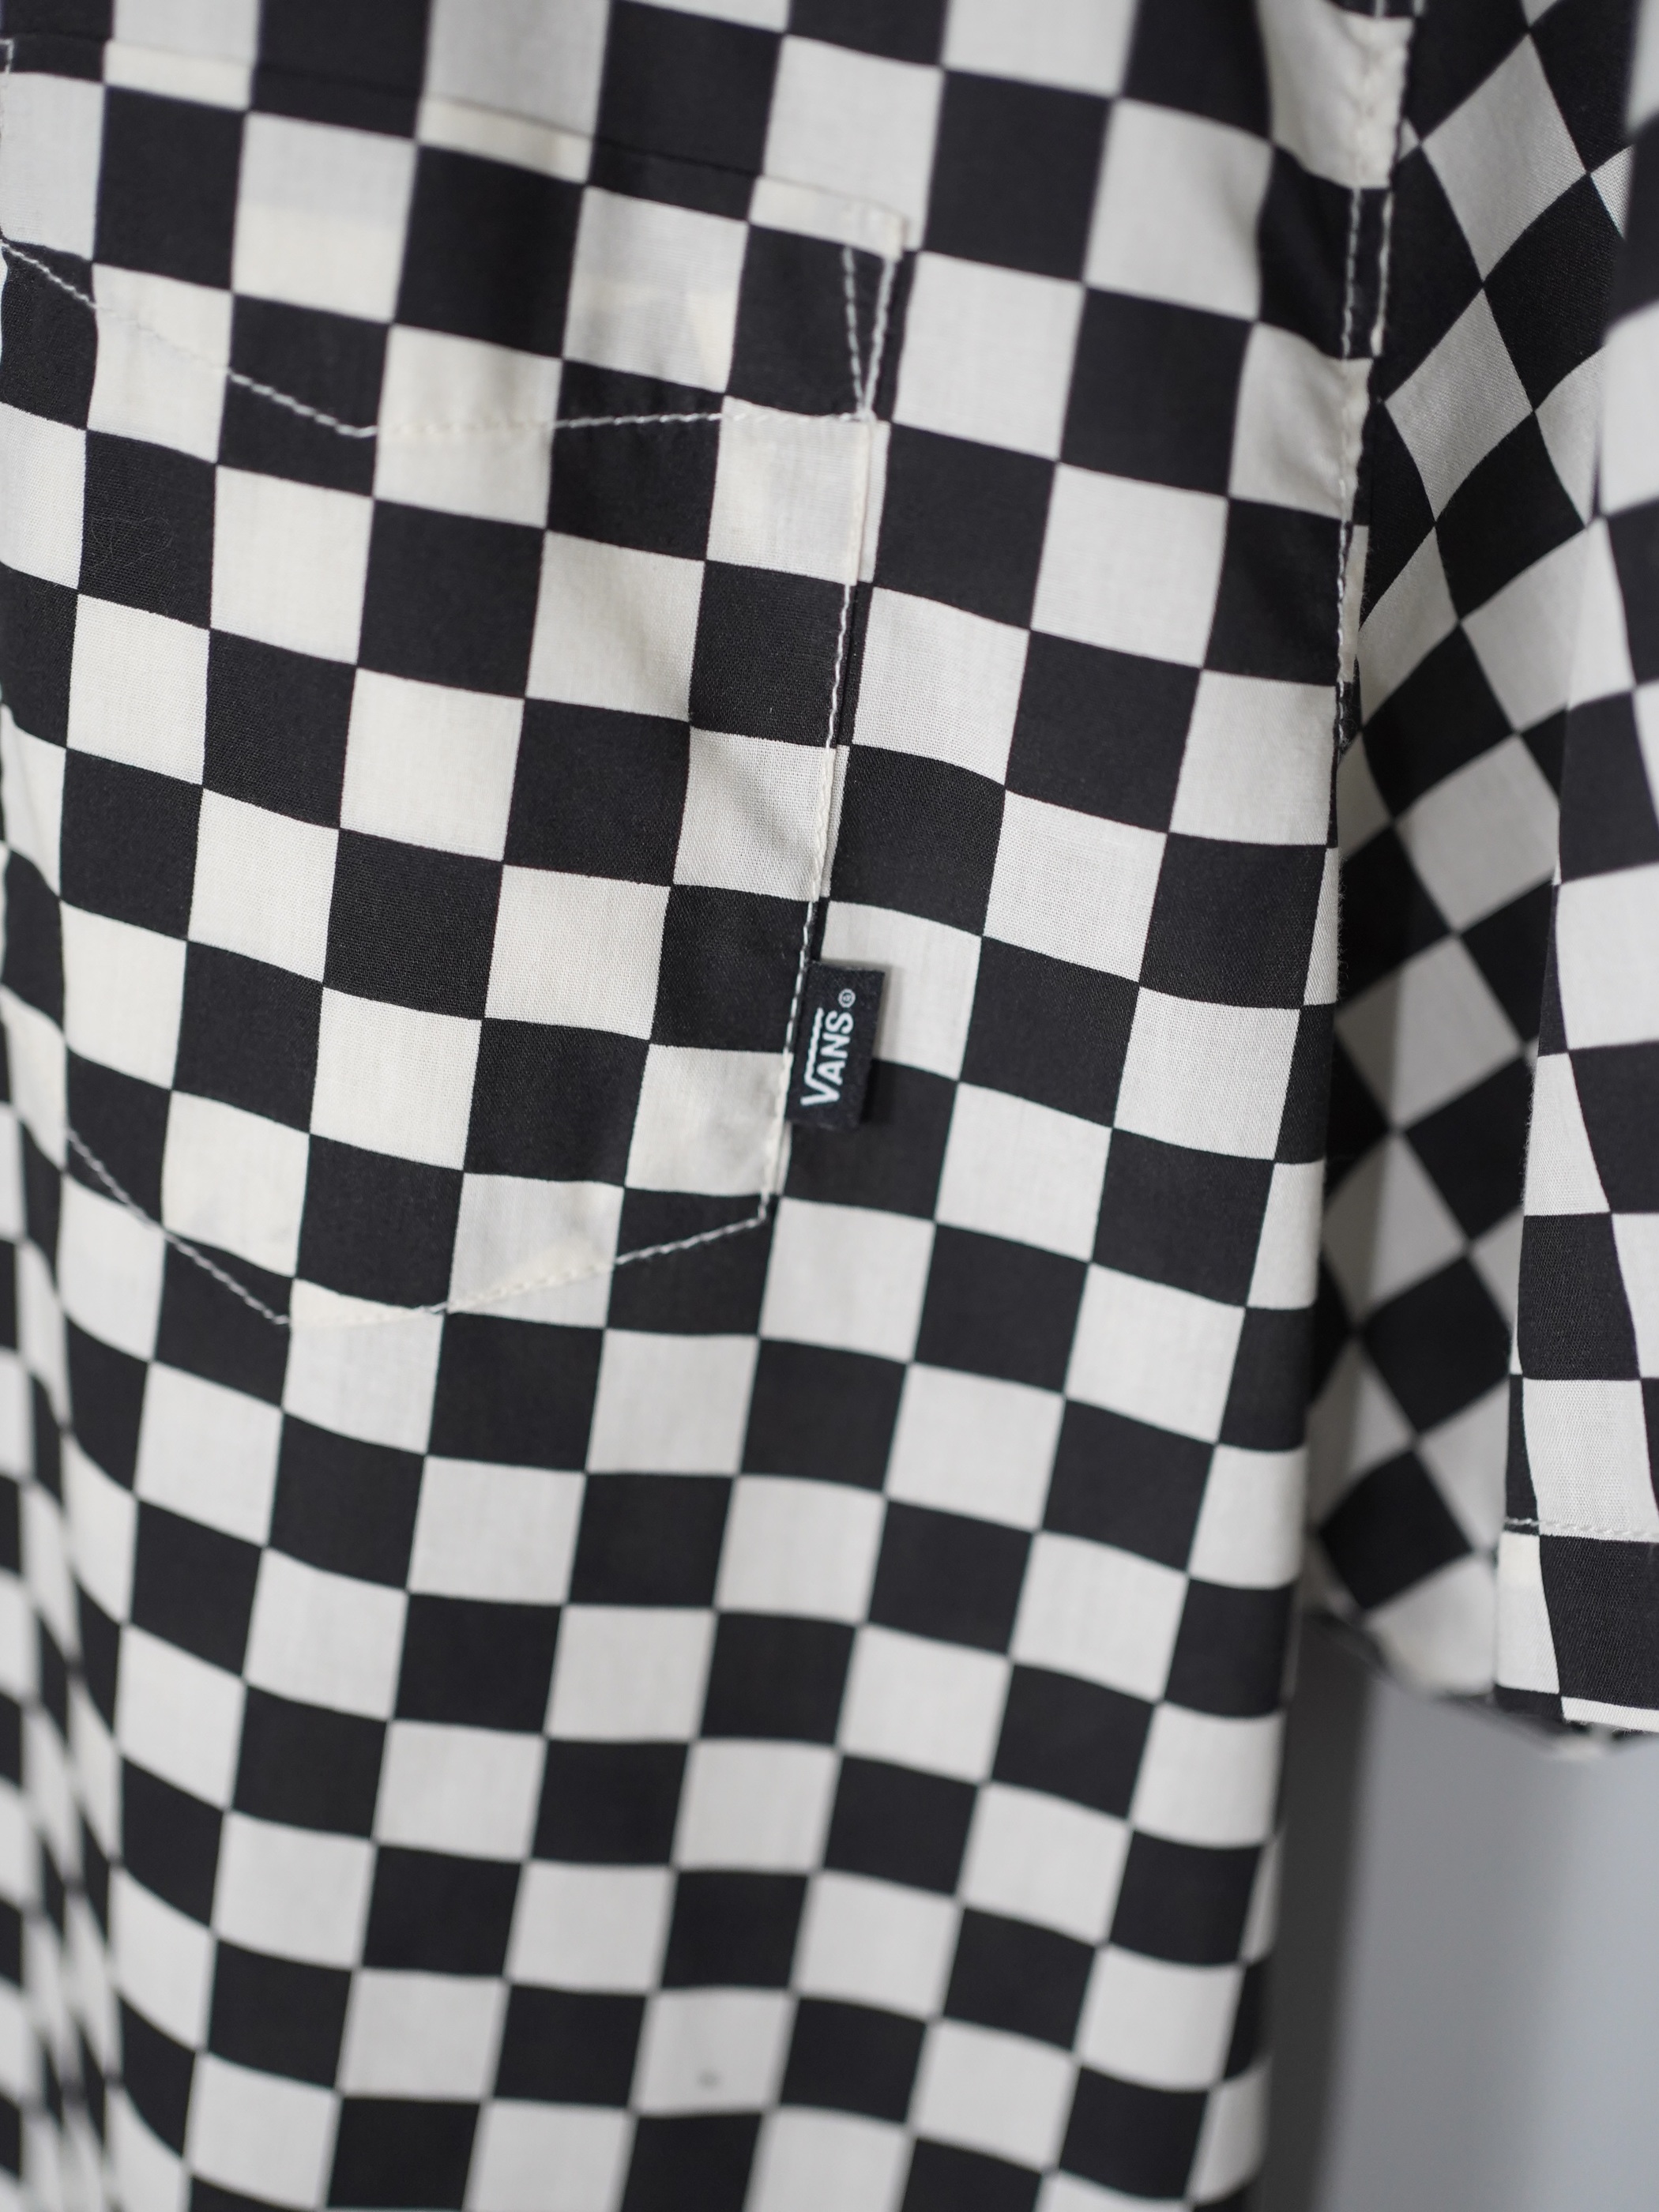 VANS Classic fit Checkered flag shirts / Made in India